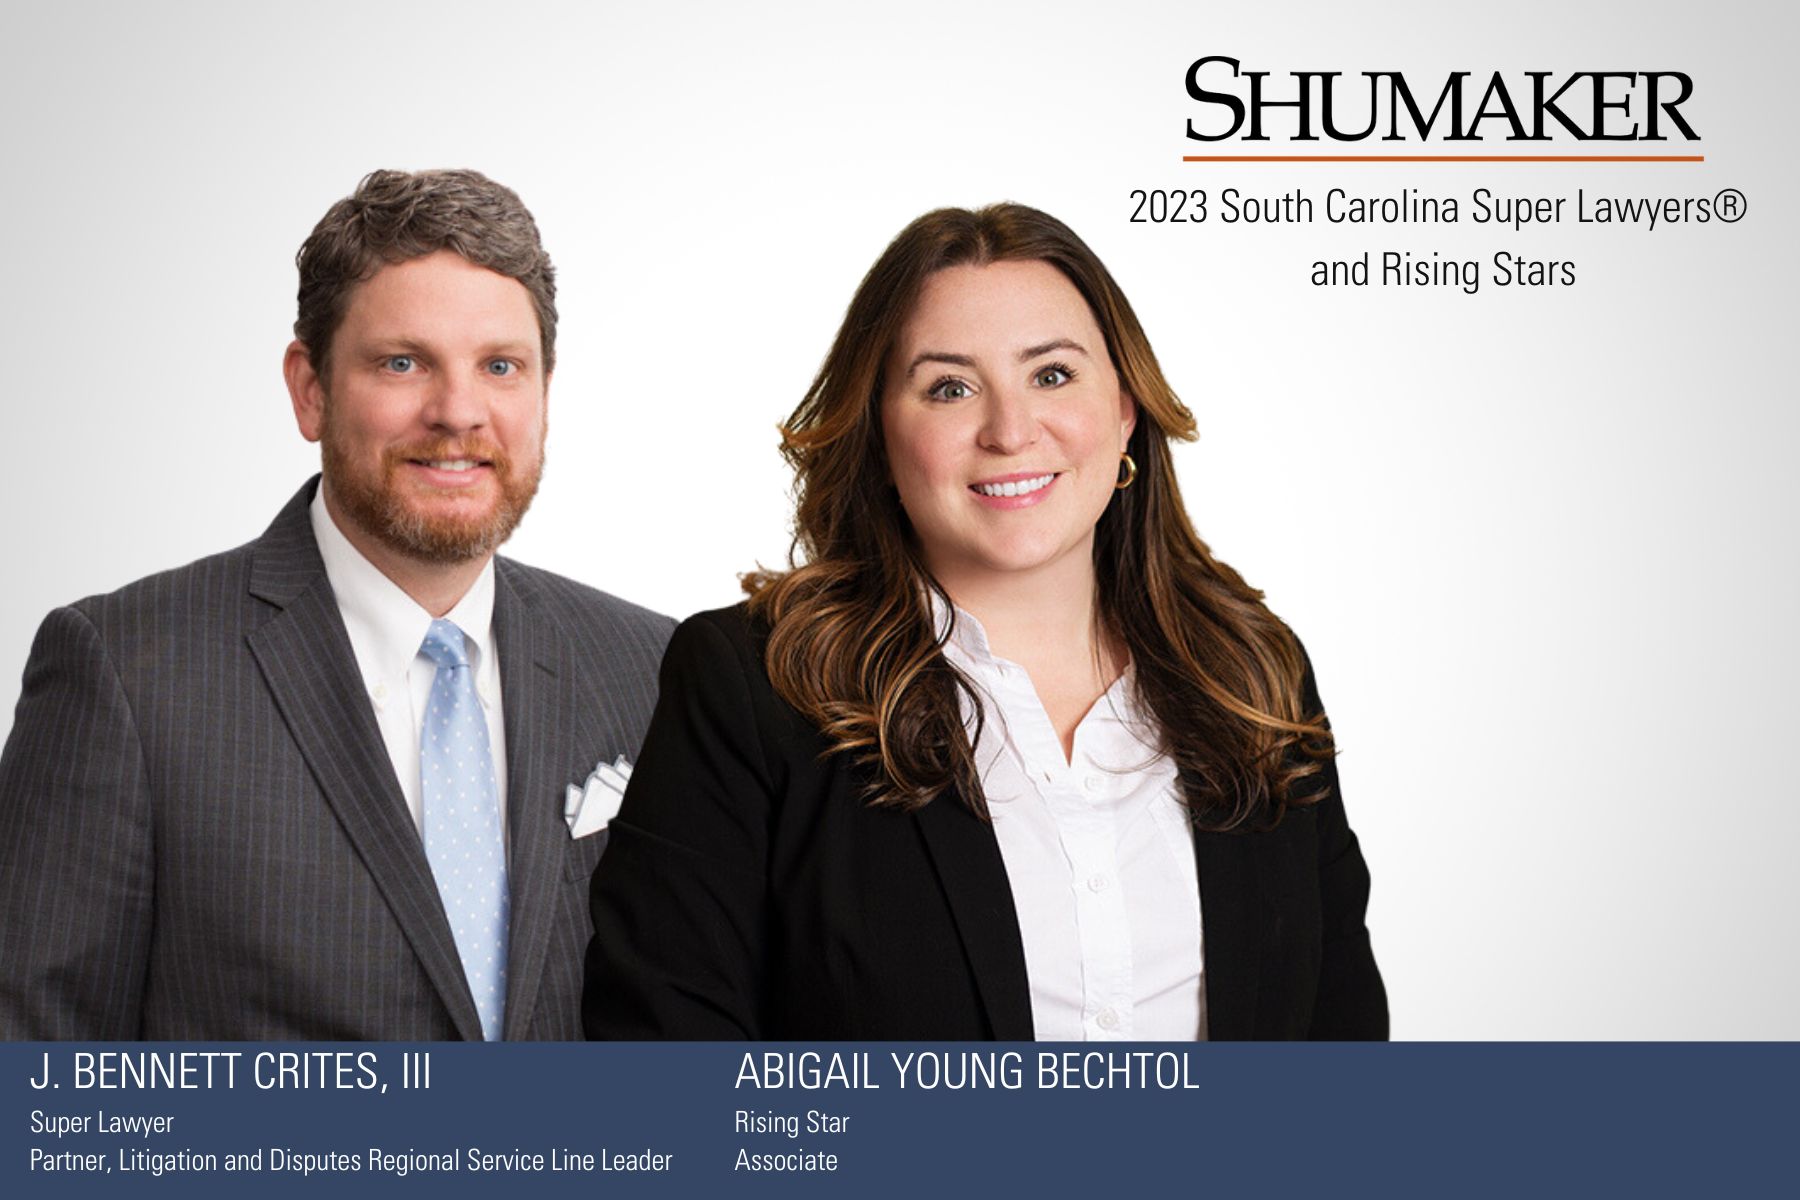 Shumaker Lawyers Recognized as 2023 South Carolina Super Lawyers® and Rising Stars